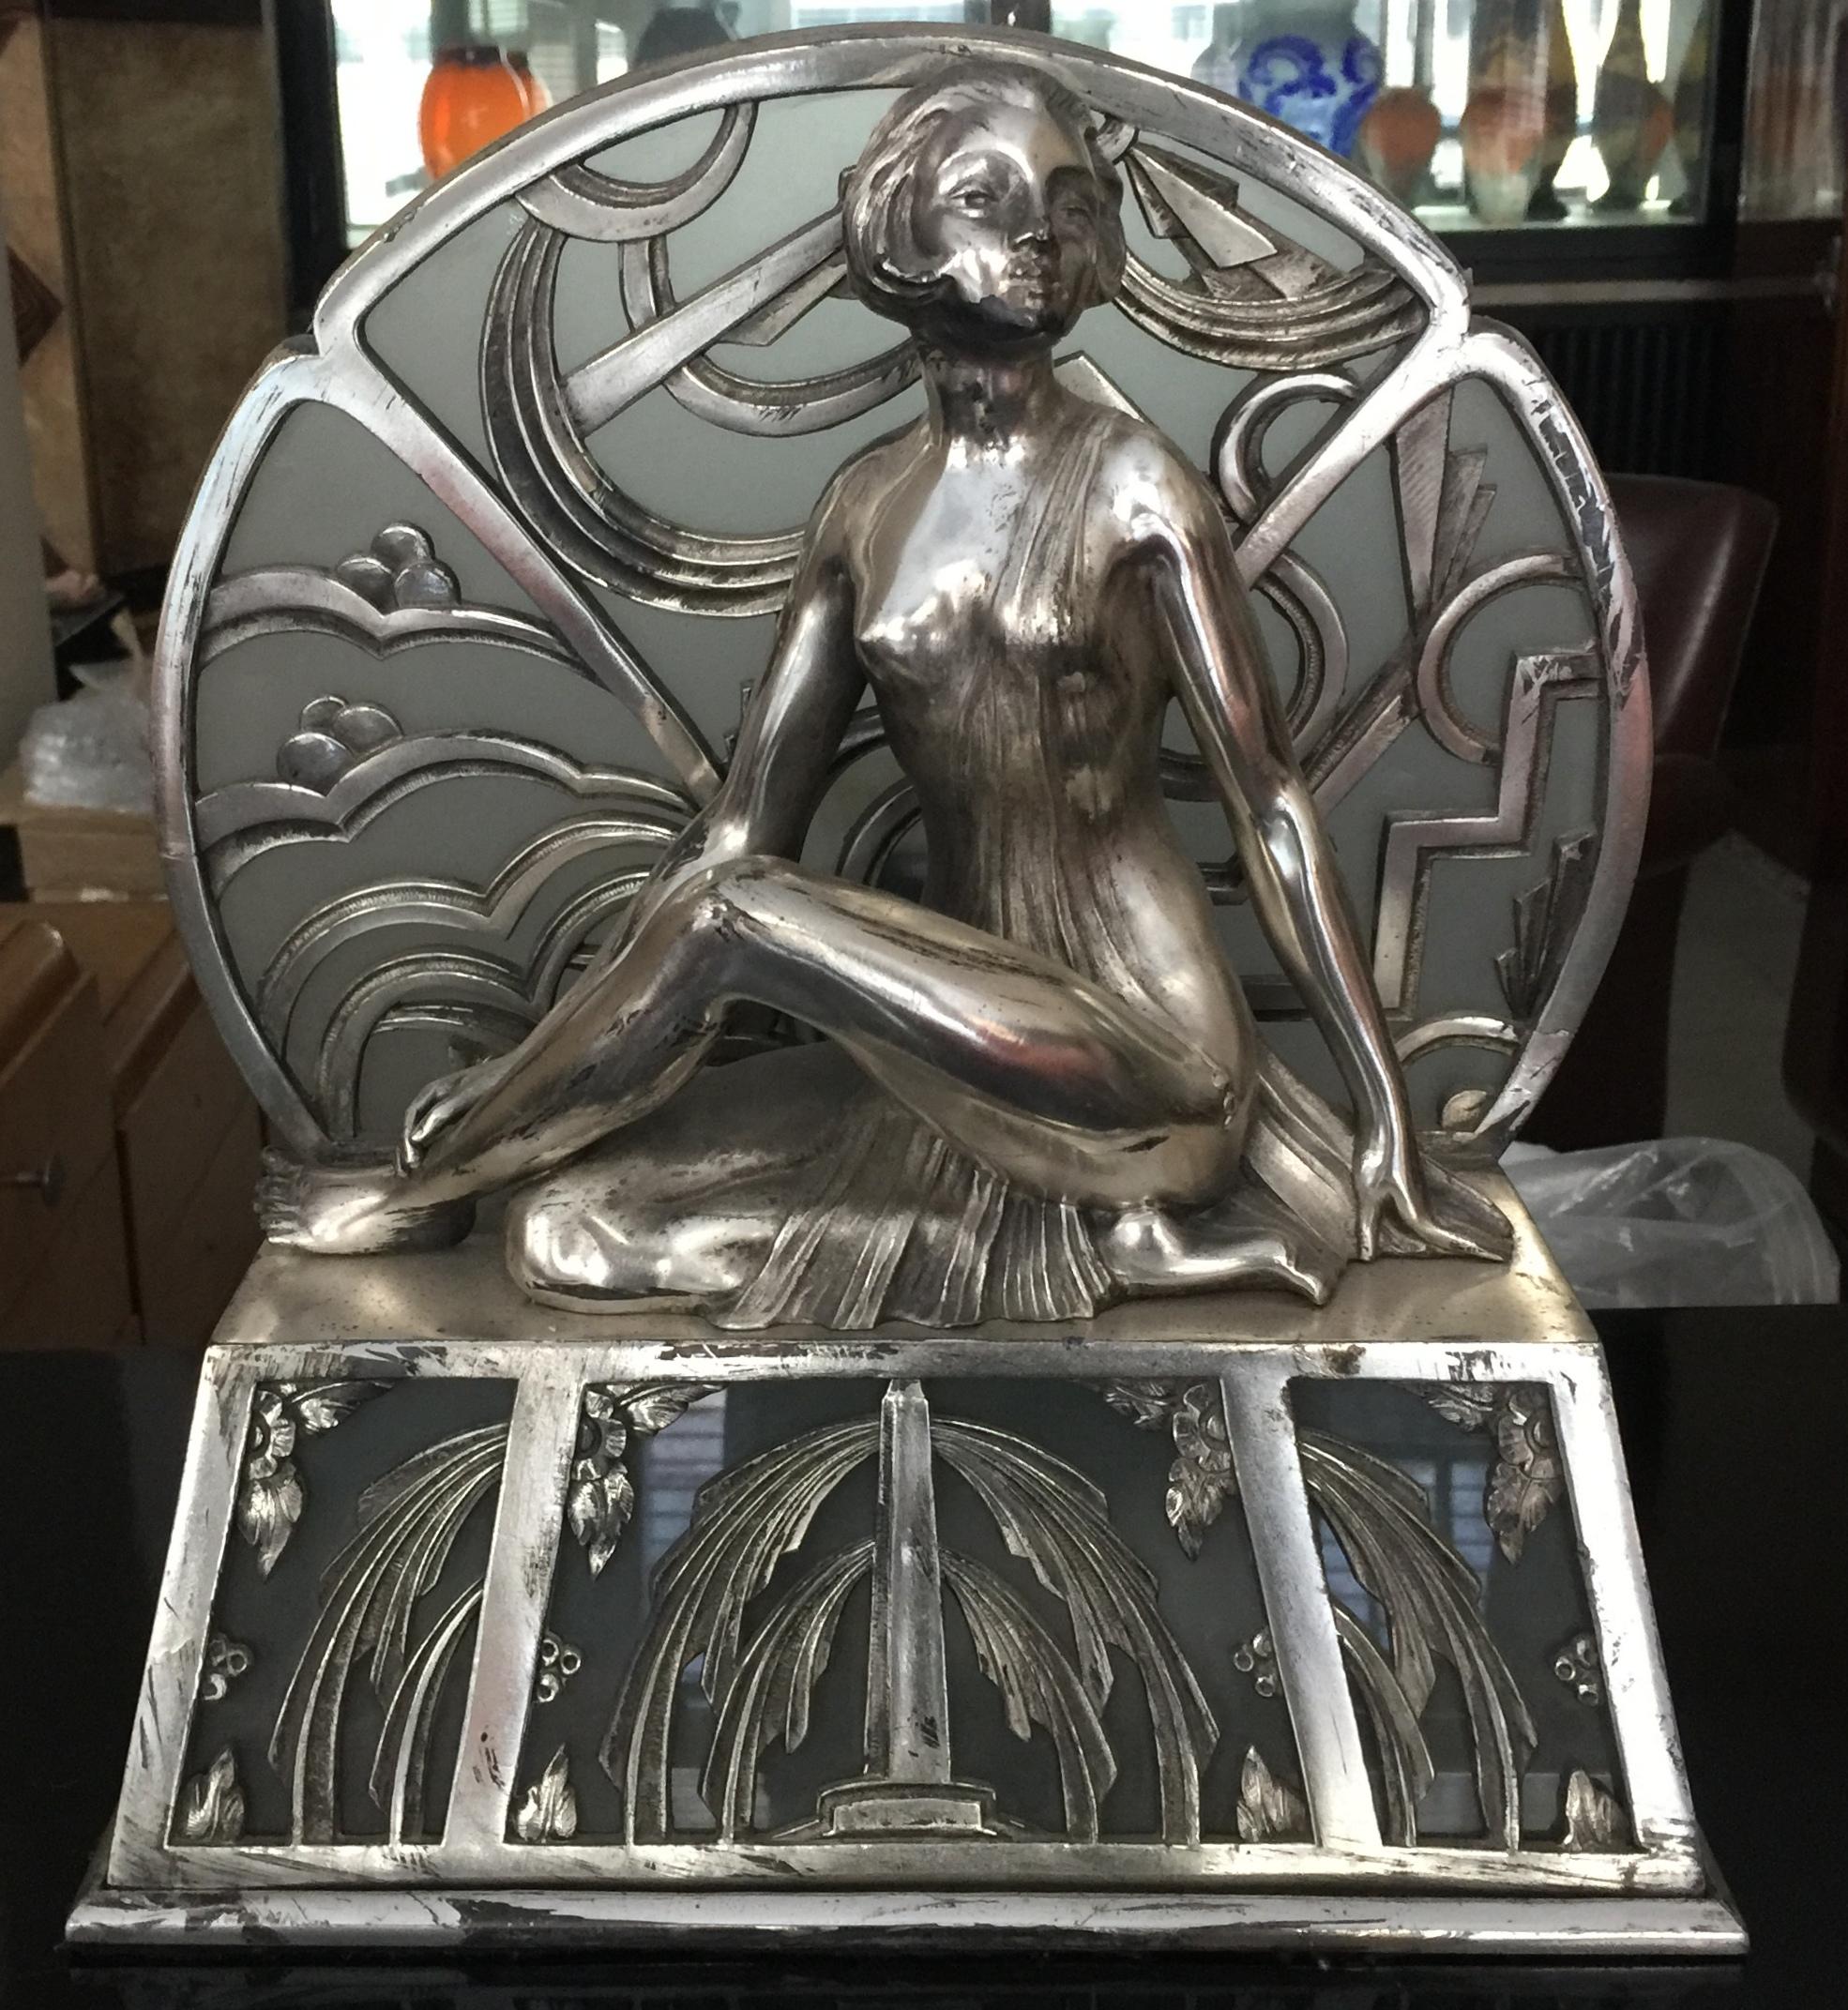 Tables lamps Art deco

Materia:Glass and silver plated metal
Style: Art Deco
Country: France
To take care of your property and the lives of our customers, the new wiring has been done.
We have specialized in the sale of Art Deco and Art Nouveau and